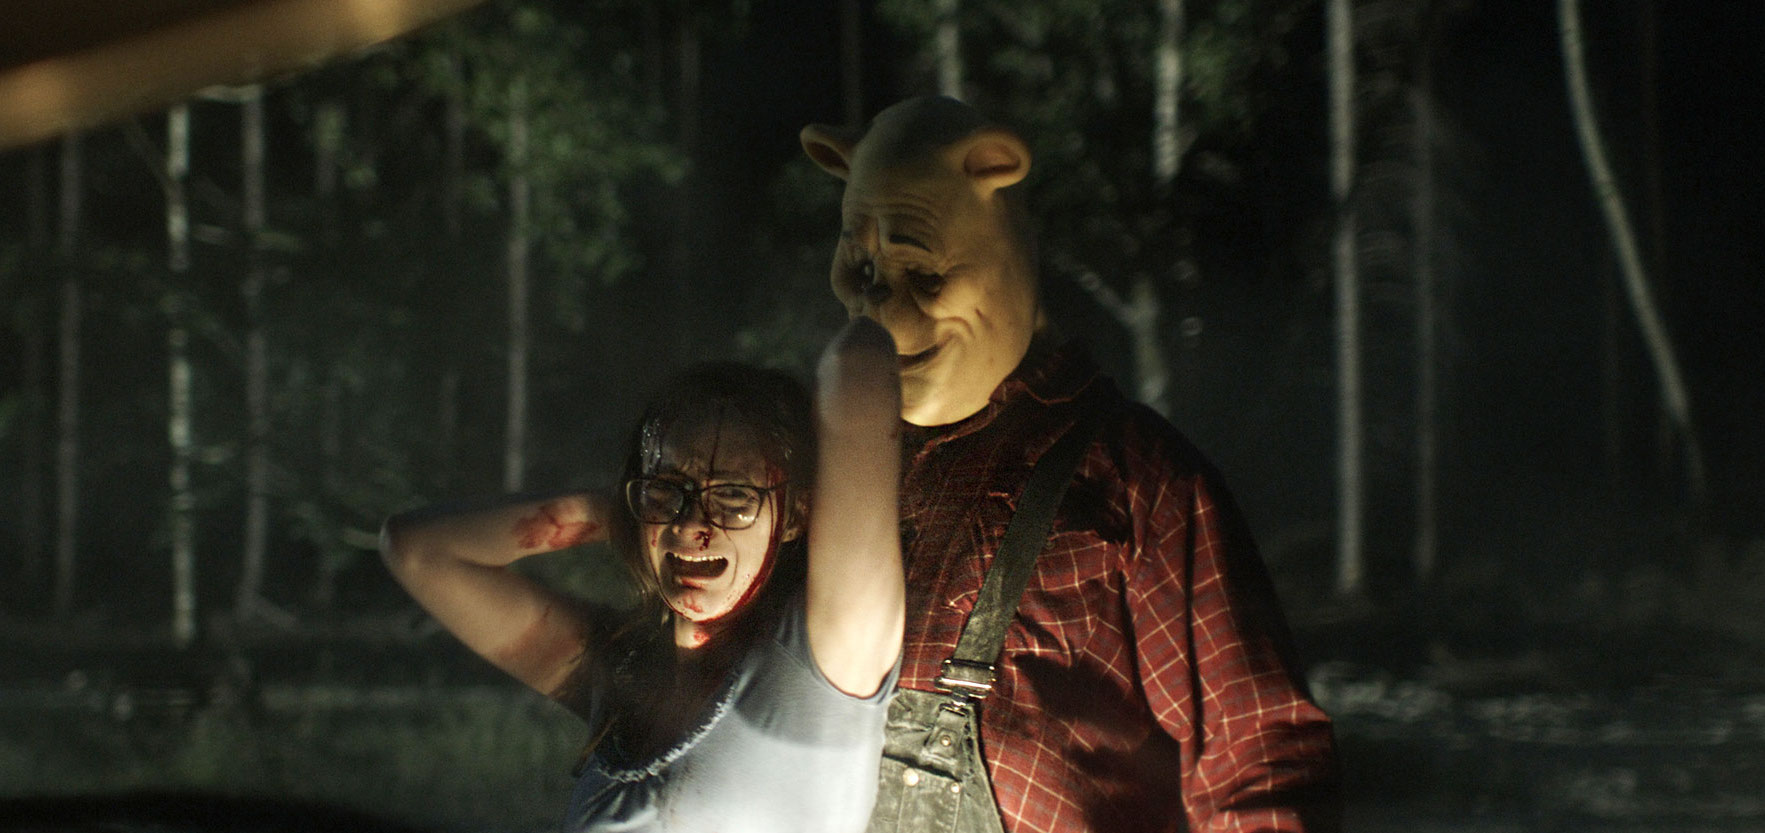 A grown-up Winnie the Pooh (Craig David Dowsett, in a vinyl mask) holds a wailing, bloodied victim by the hair in the light of a truck’s headlights in Winnie the Pooh: Blood and Honey